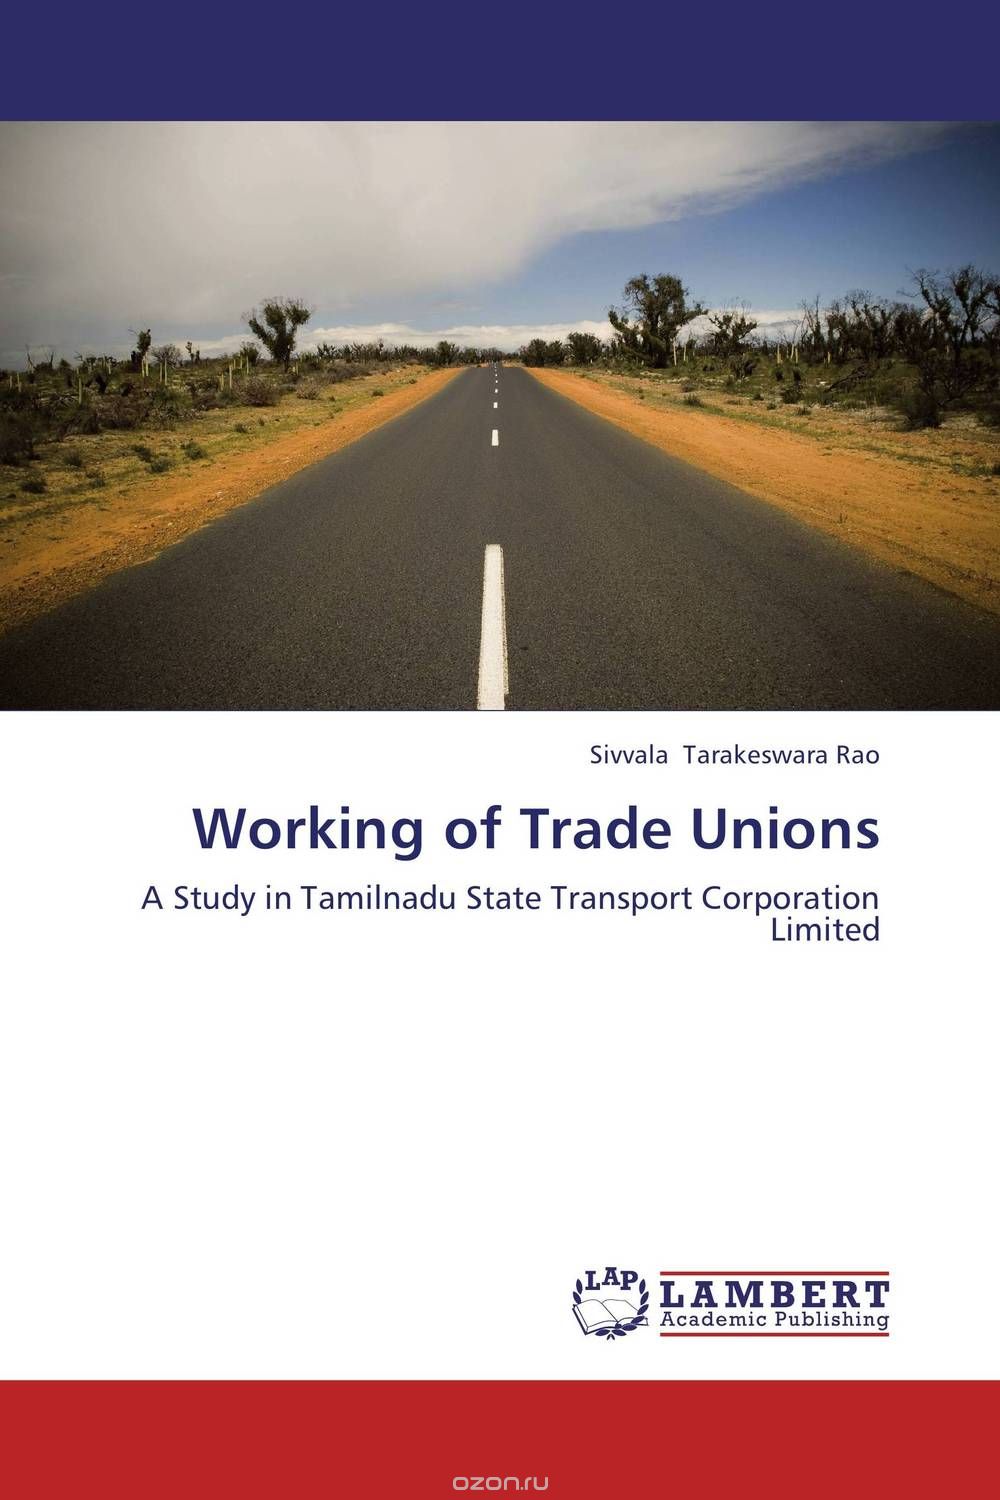 Working of Trade Unions